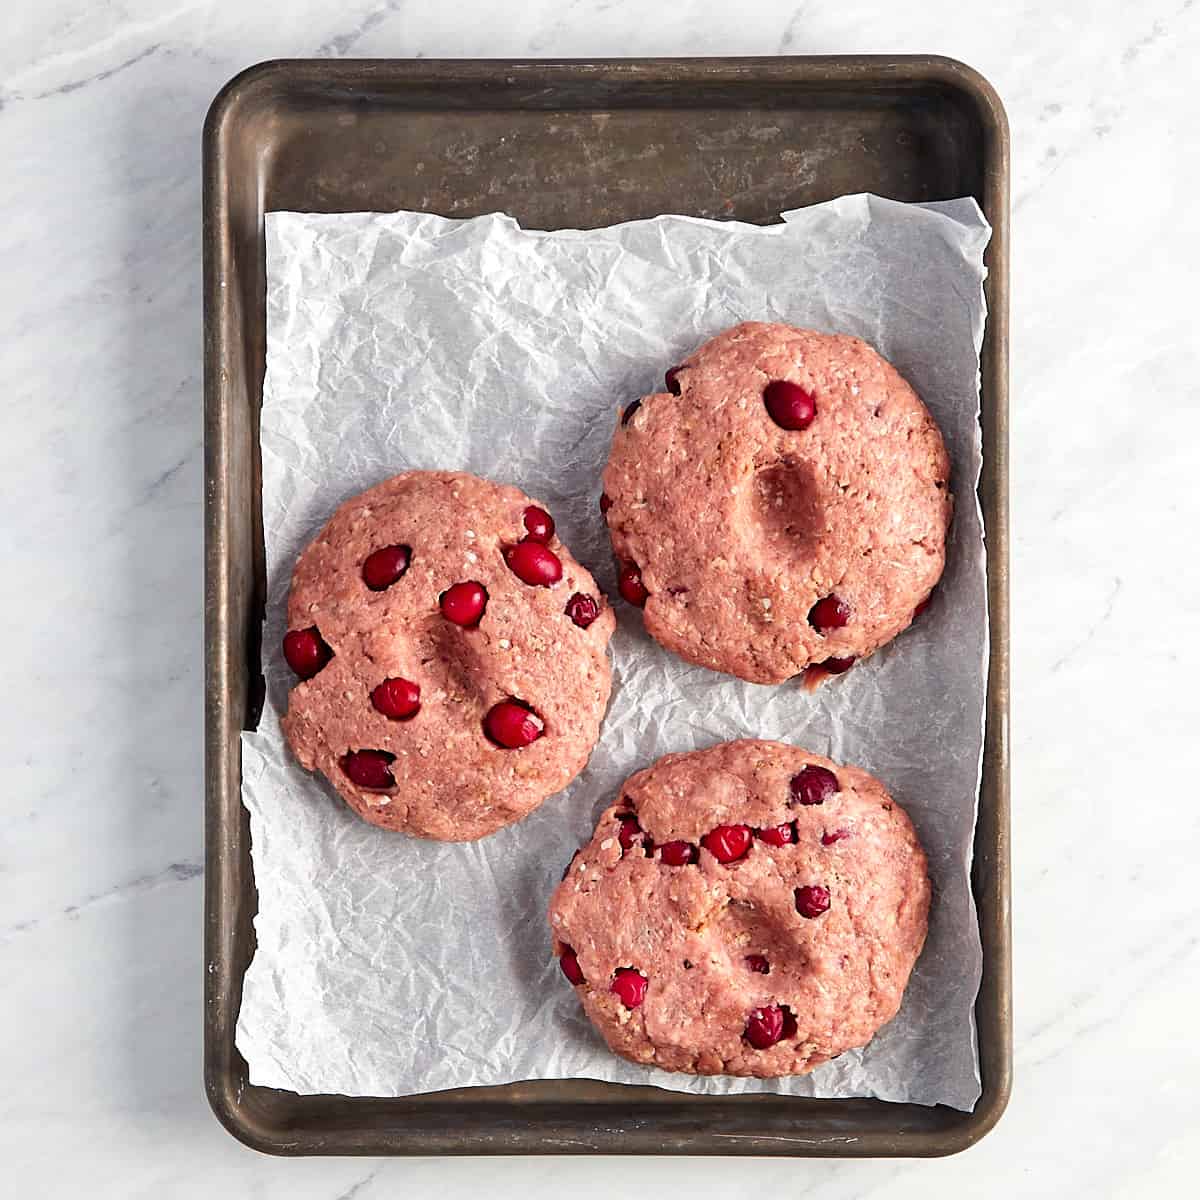 uncooked cranberry turkey burgers on a cookie sheet